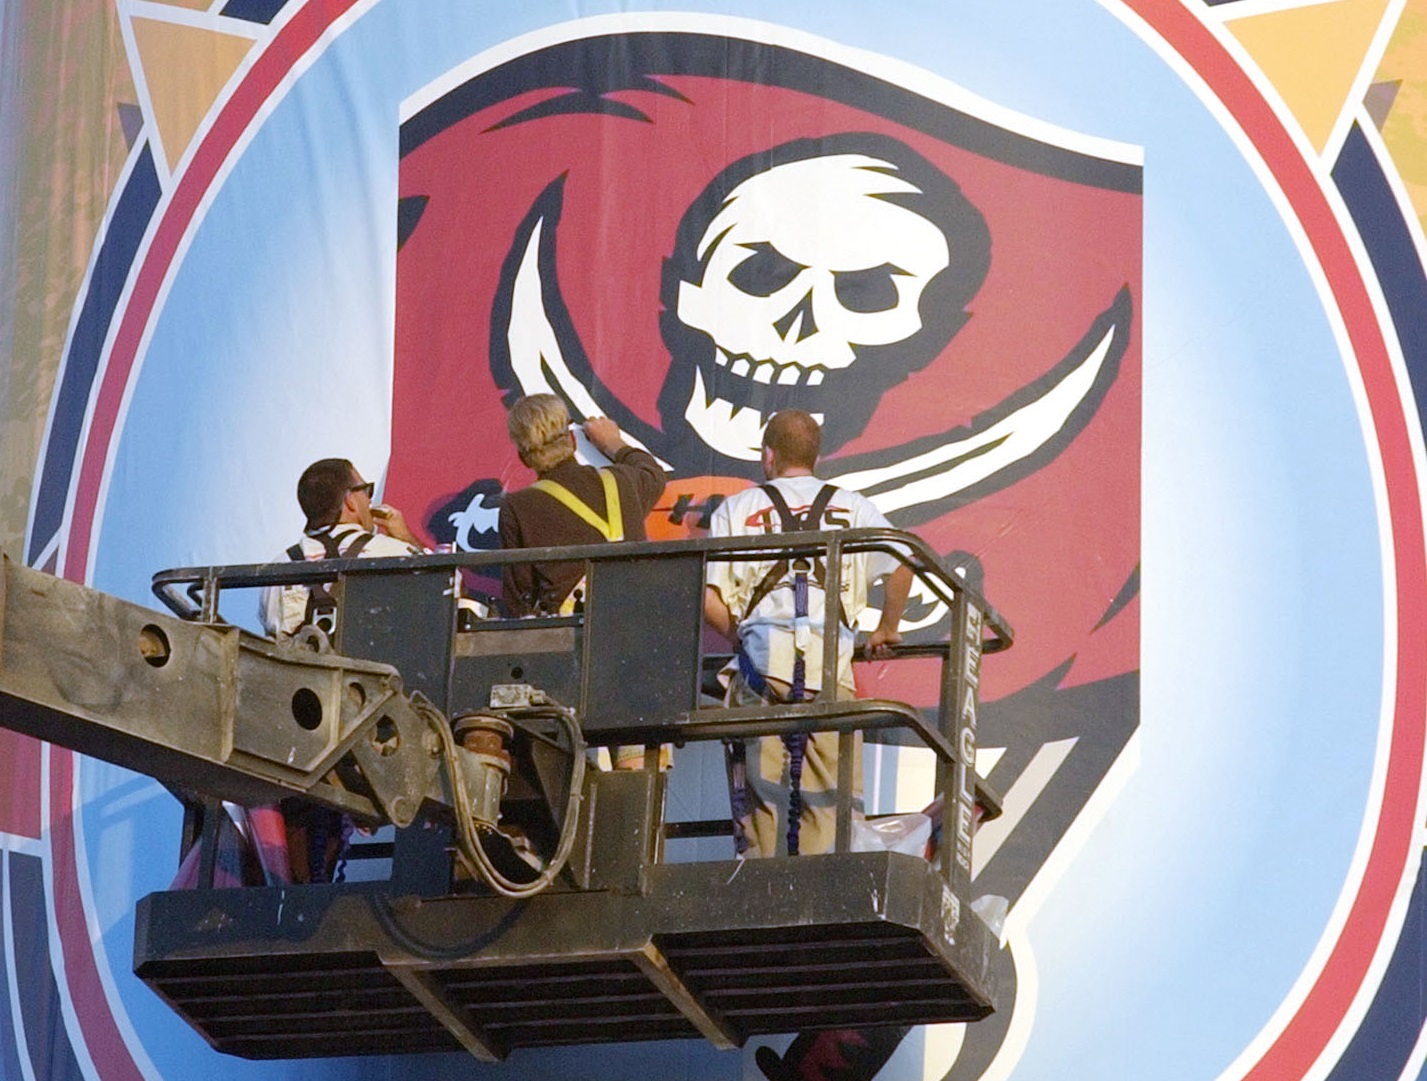 Workers put the finishing touches on the Tampa Bay Buccaneers logo at Qualcomm Stadium in San Diego, Calif. Tuesday, Jan. 21, 2003. The Bucs will face the Oakland Raiders on Sunday, Jan. 26, 2003, in Super Bowl XXXVII. (AP Photo/David J. Phillip)